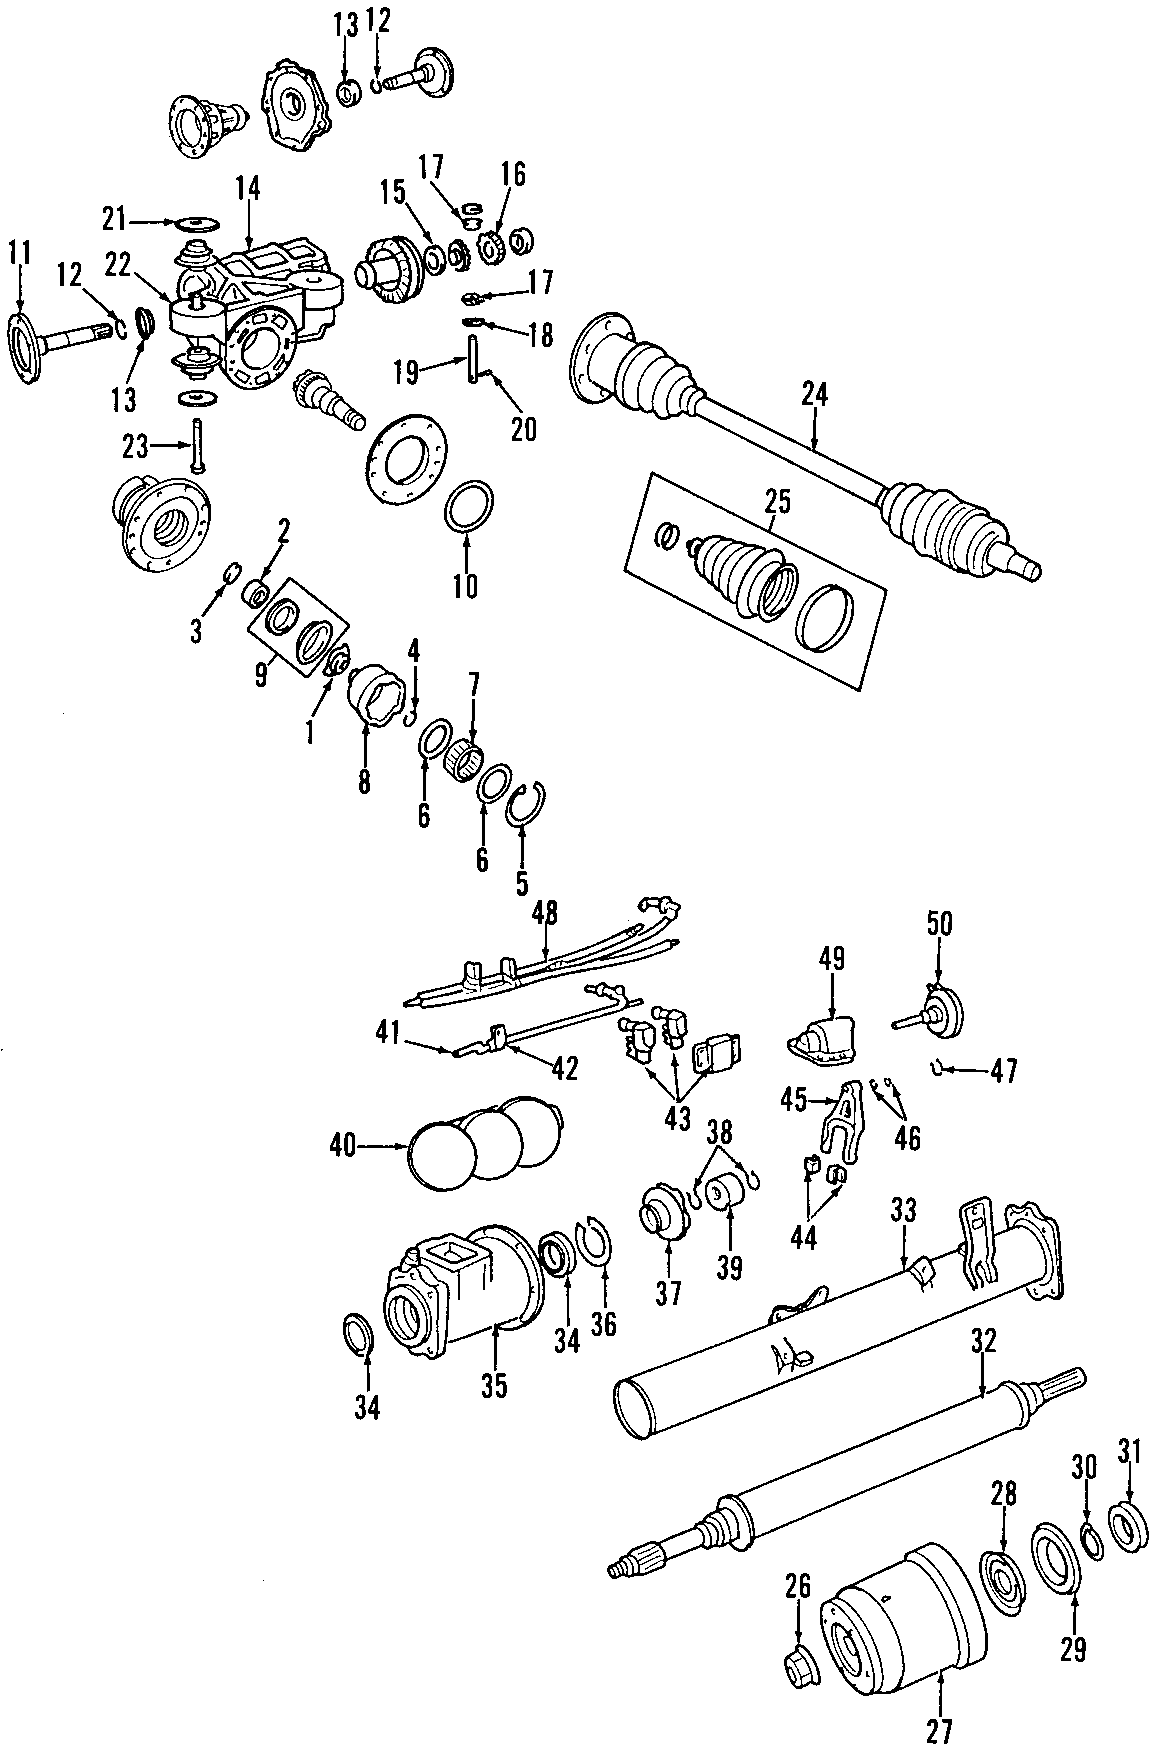 DRIVE AXLES. REAR AXLE. AXLE SHAFTS & JOINTS. DIFFERENTIAL. PROPELLER SHAFT.https://images.simplepart.com/images/parts/motor/fullsize/T040085.png